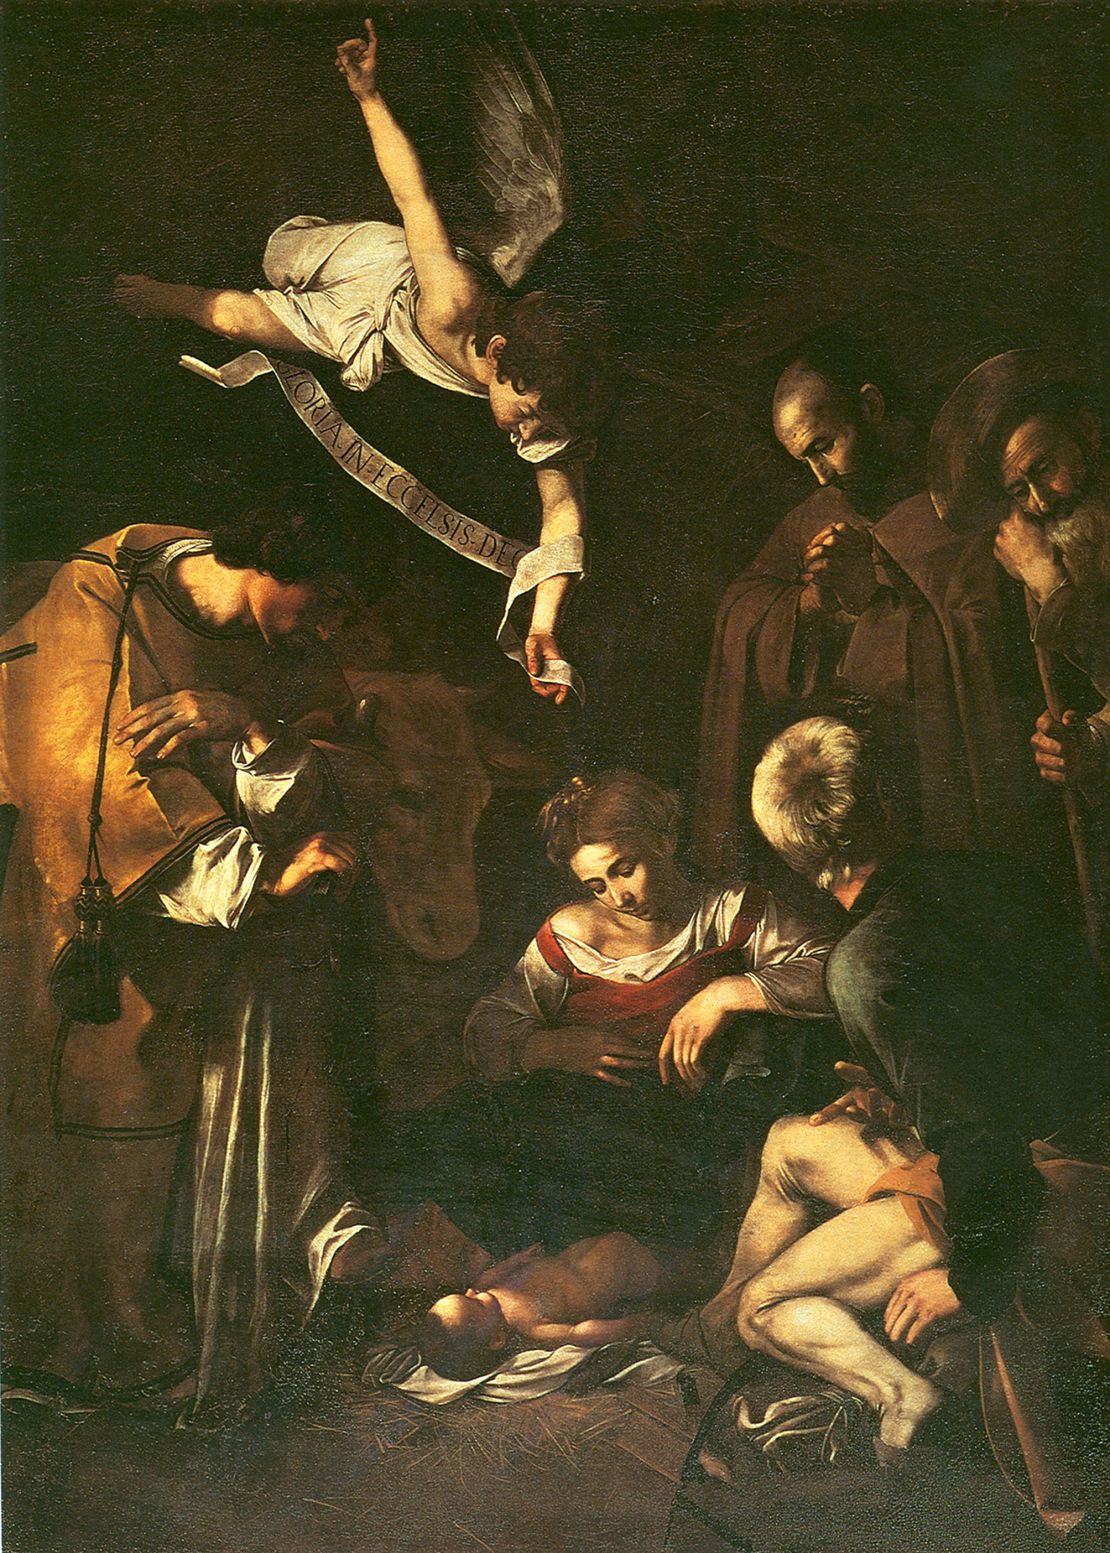 Cosa Nostra, which is widely thought to have been responsible for the theft of Caravaggio's "Nativity with St. Francis and St. Lawrence" from a Palermo church in 1969.